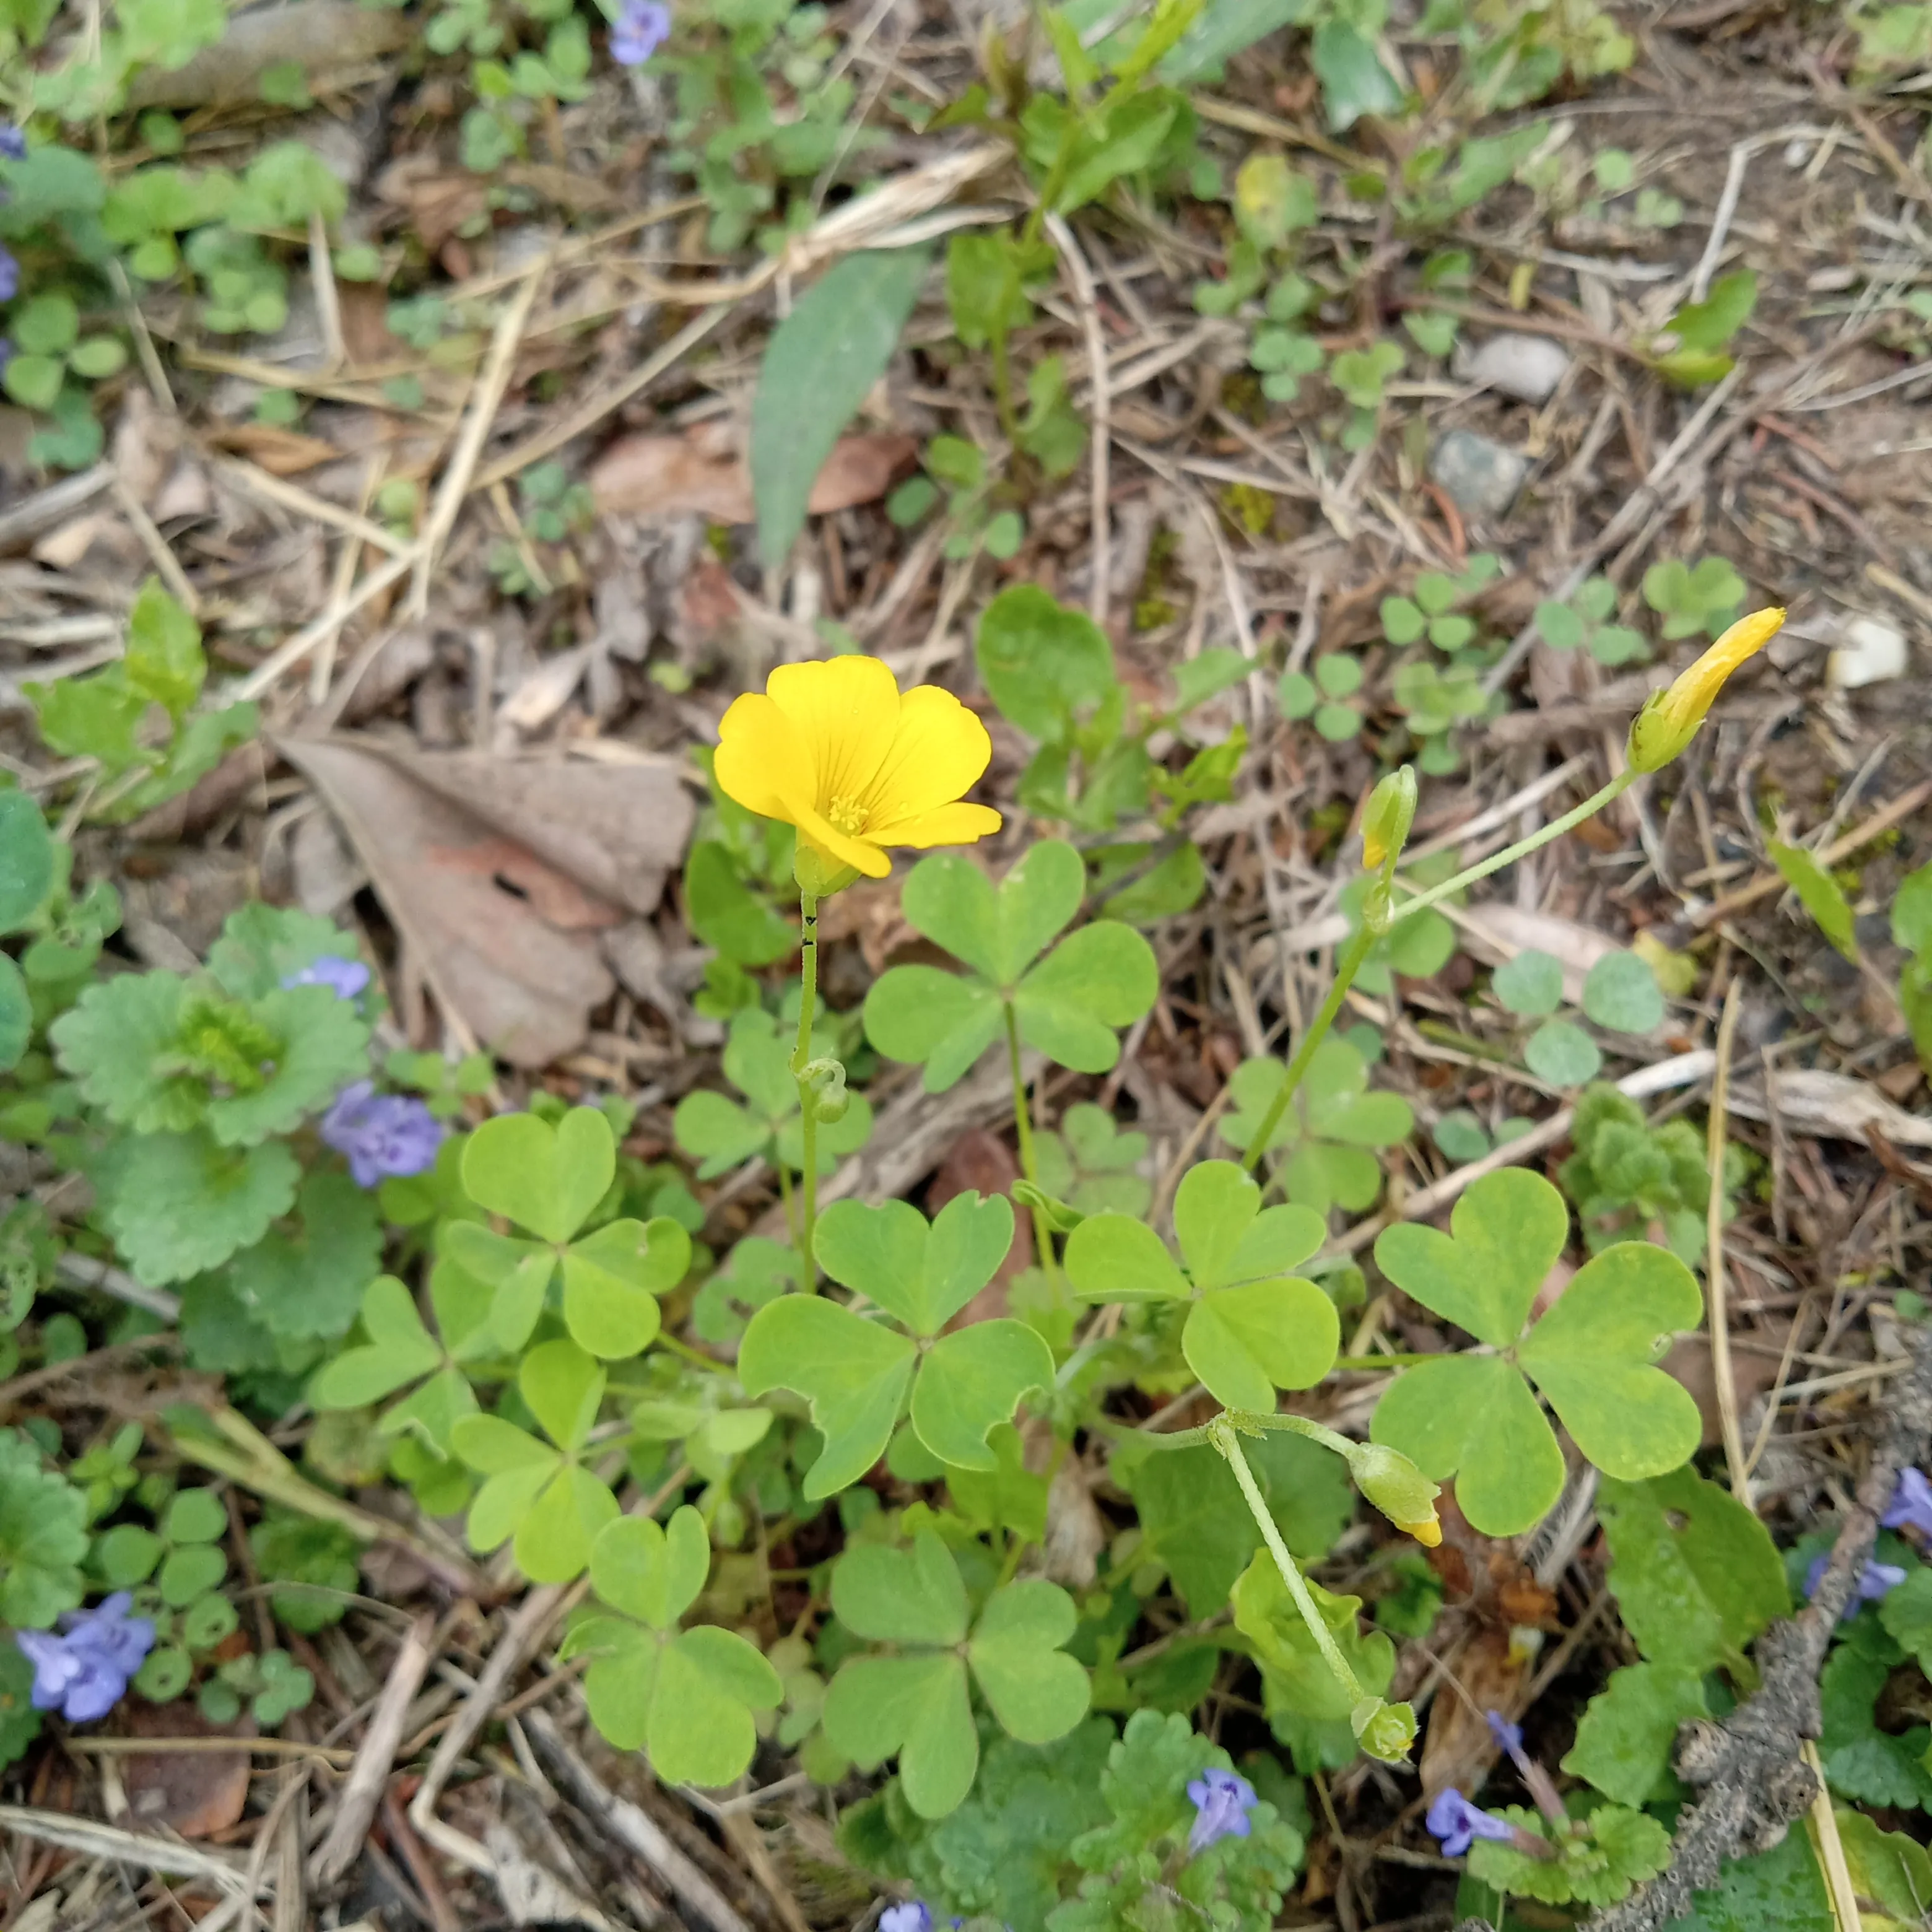 A common yellow woodsorrel flower, a small clover-like plant with a yellow flower with five petals.